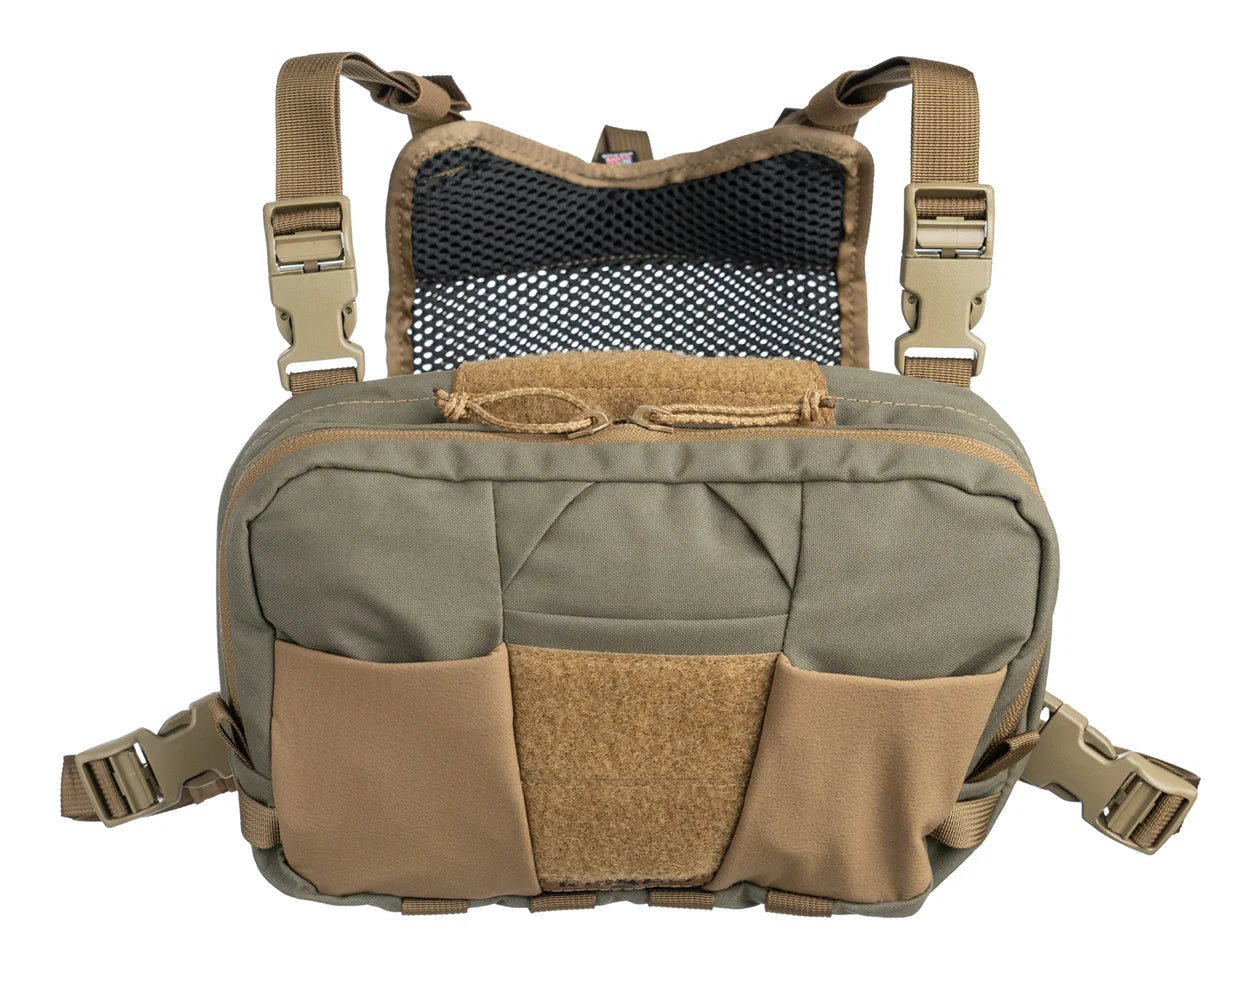 chest fly fishing bag - Buy chest fly fishing bag at Best Price in Malaysia